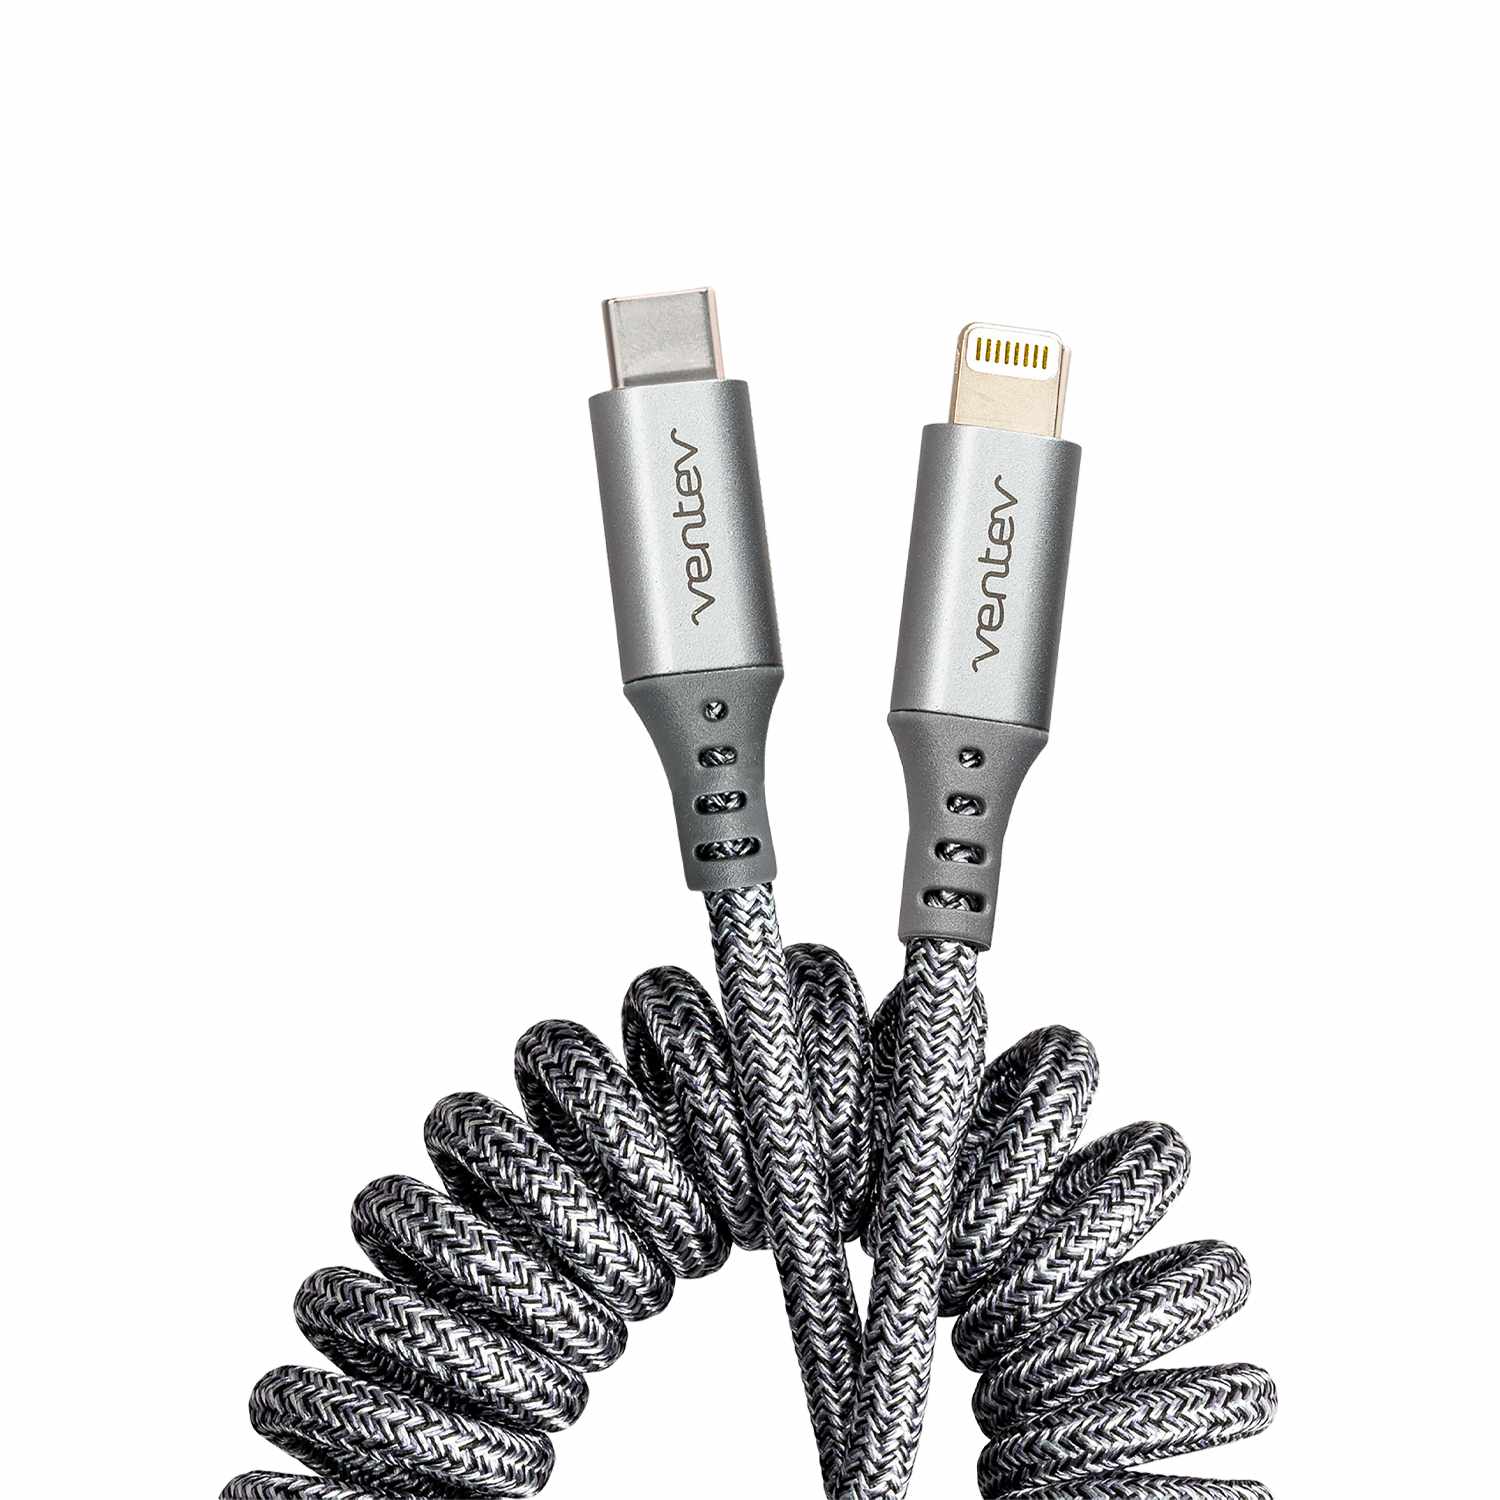 Ventev Charge/Sync Coiled USB-C to USB-C Cable 3ft